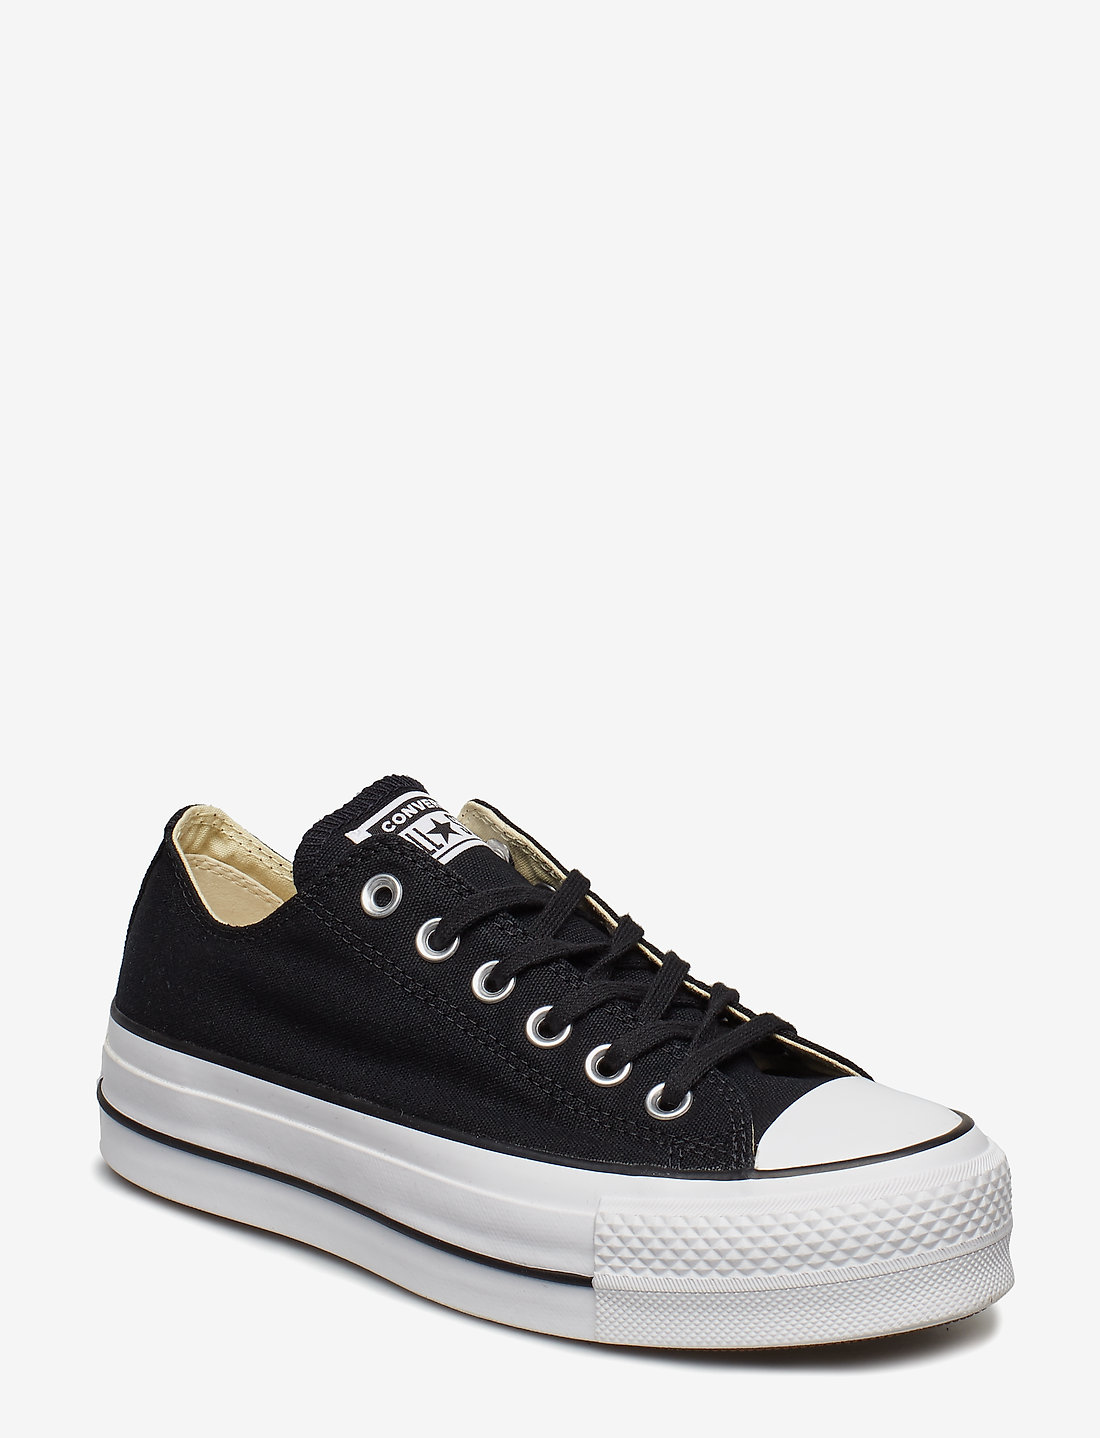 Converse Taylor All Star Lift Lave sneakers - Boozt.com